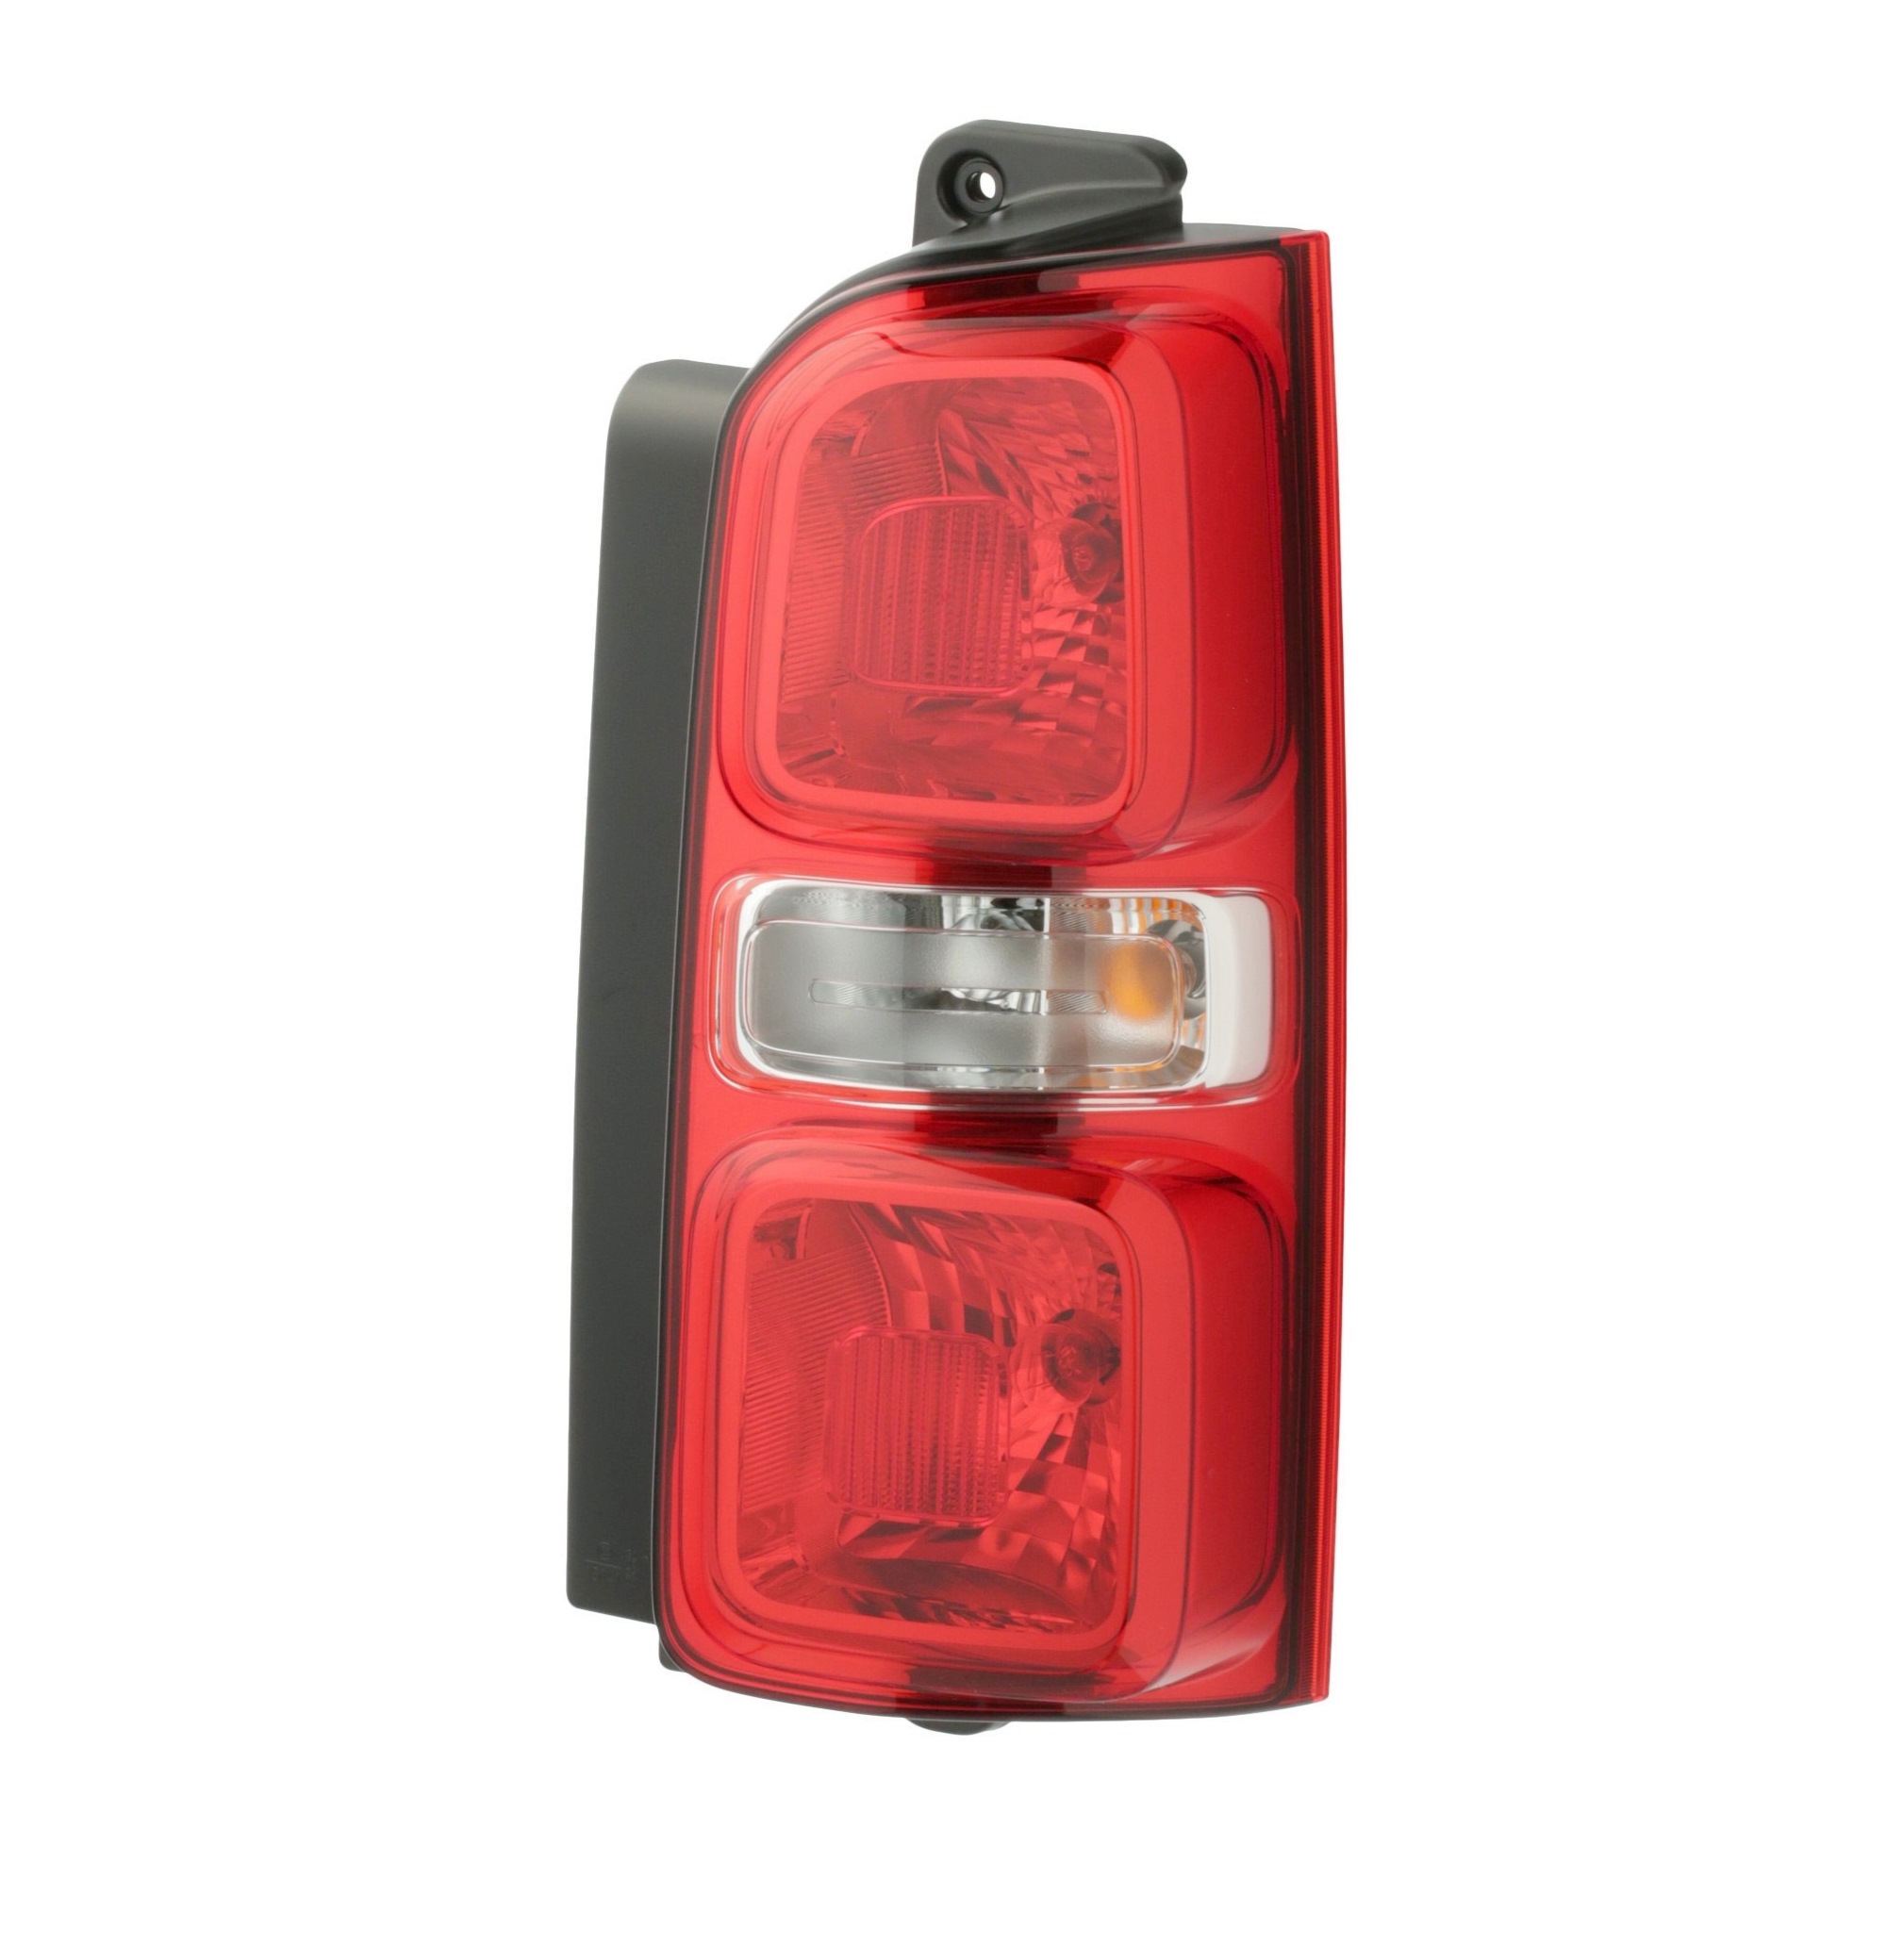 HELLA 2SD 354 845-021 Rear light Right, P21/5W, P21/4W, PY21W, P21W, without bulbs, without bulb holder